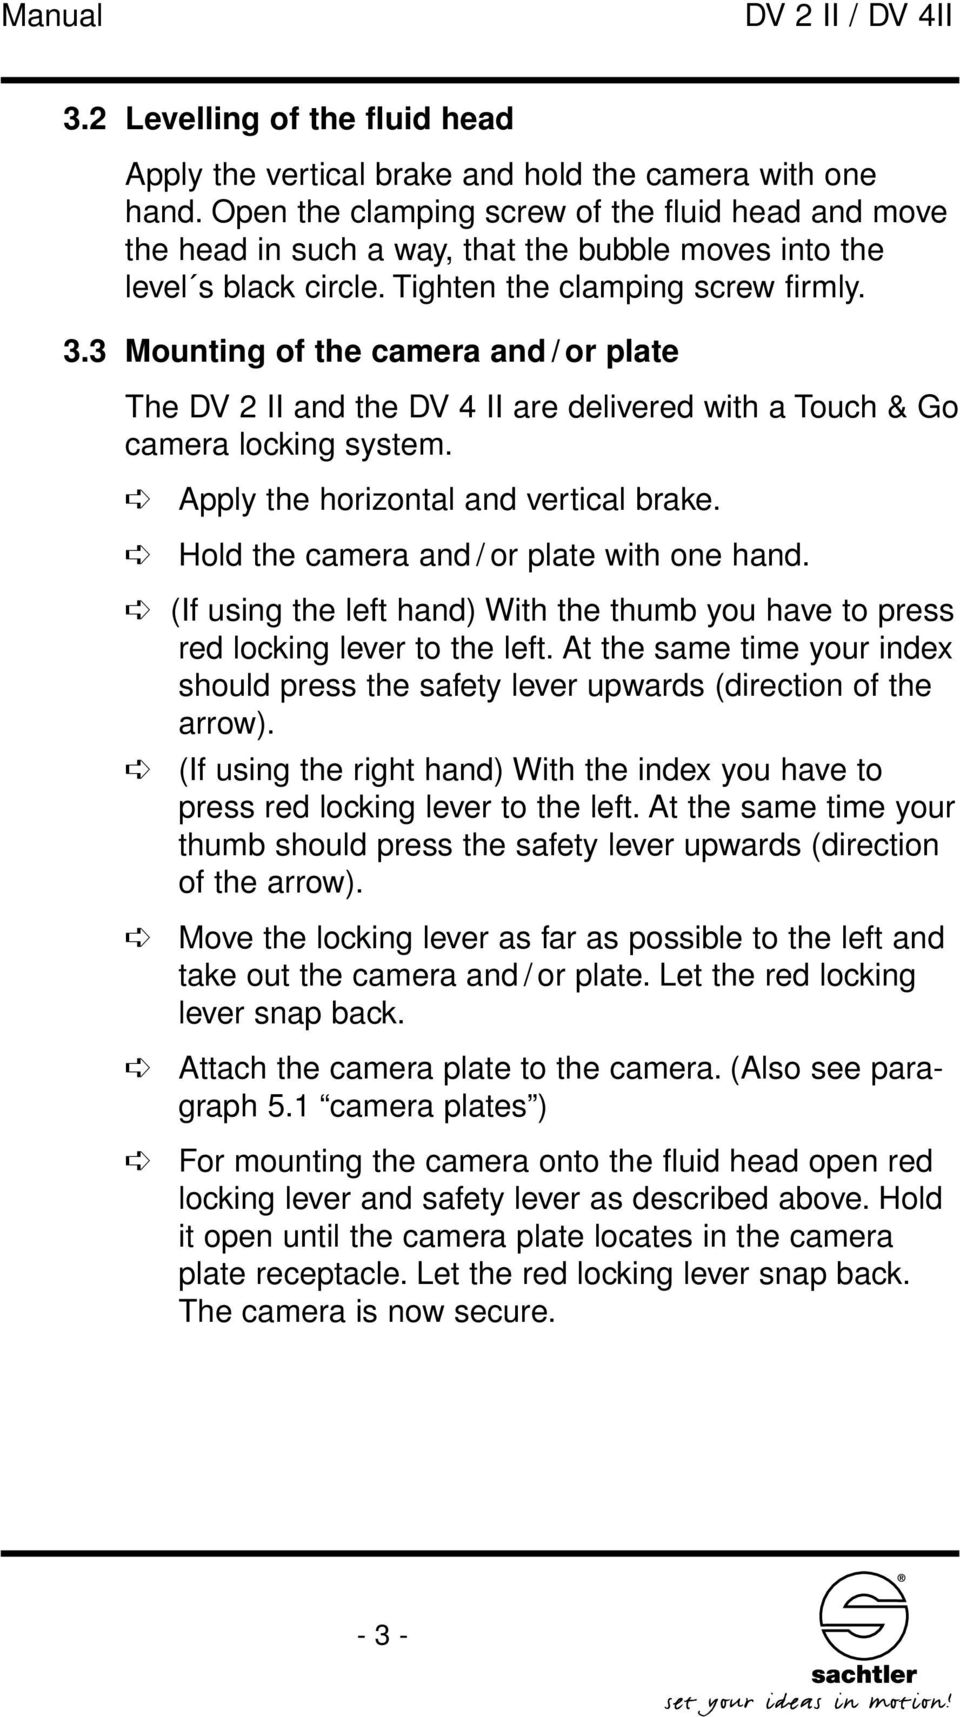 3 Mounting of the camera and / or plate The DV 2 II and the DV 4 II are delivered with a Touch & Go camera locking system. Apply the horizontal and vertical brake.